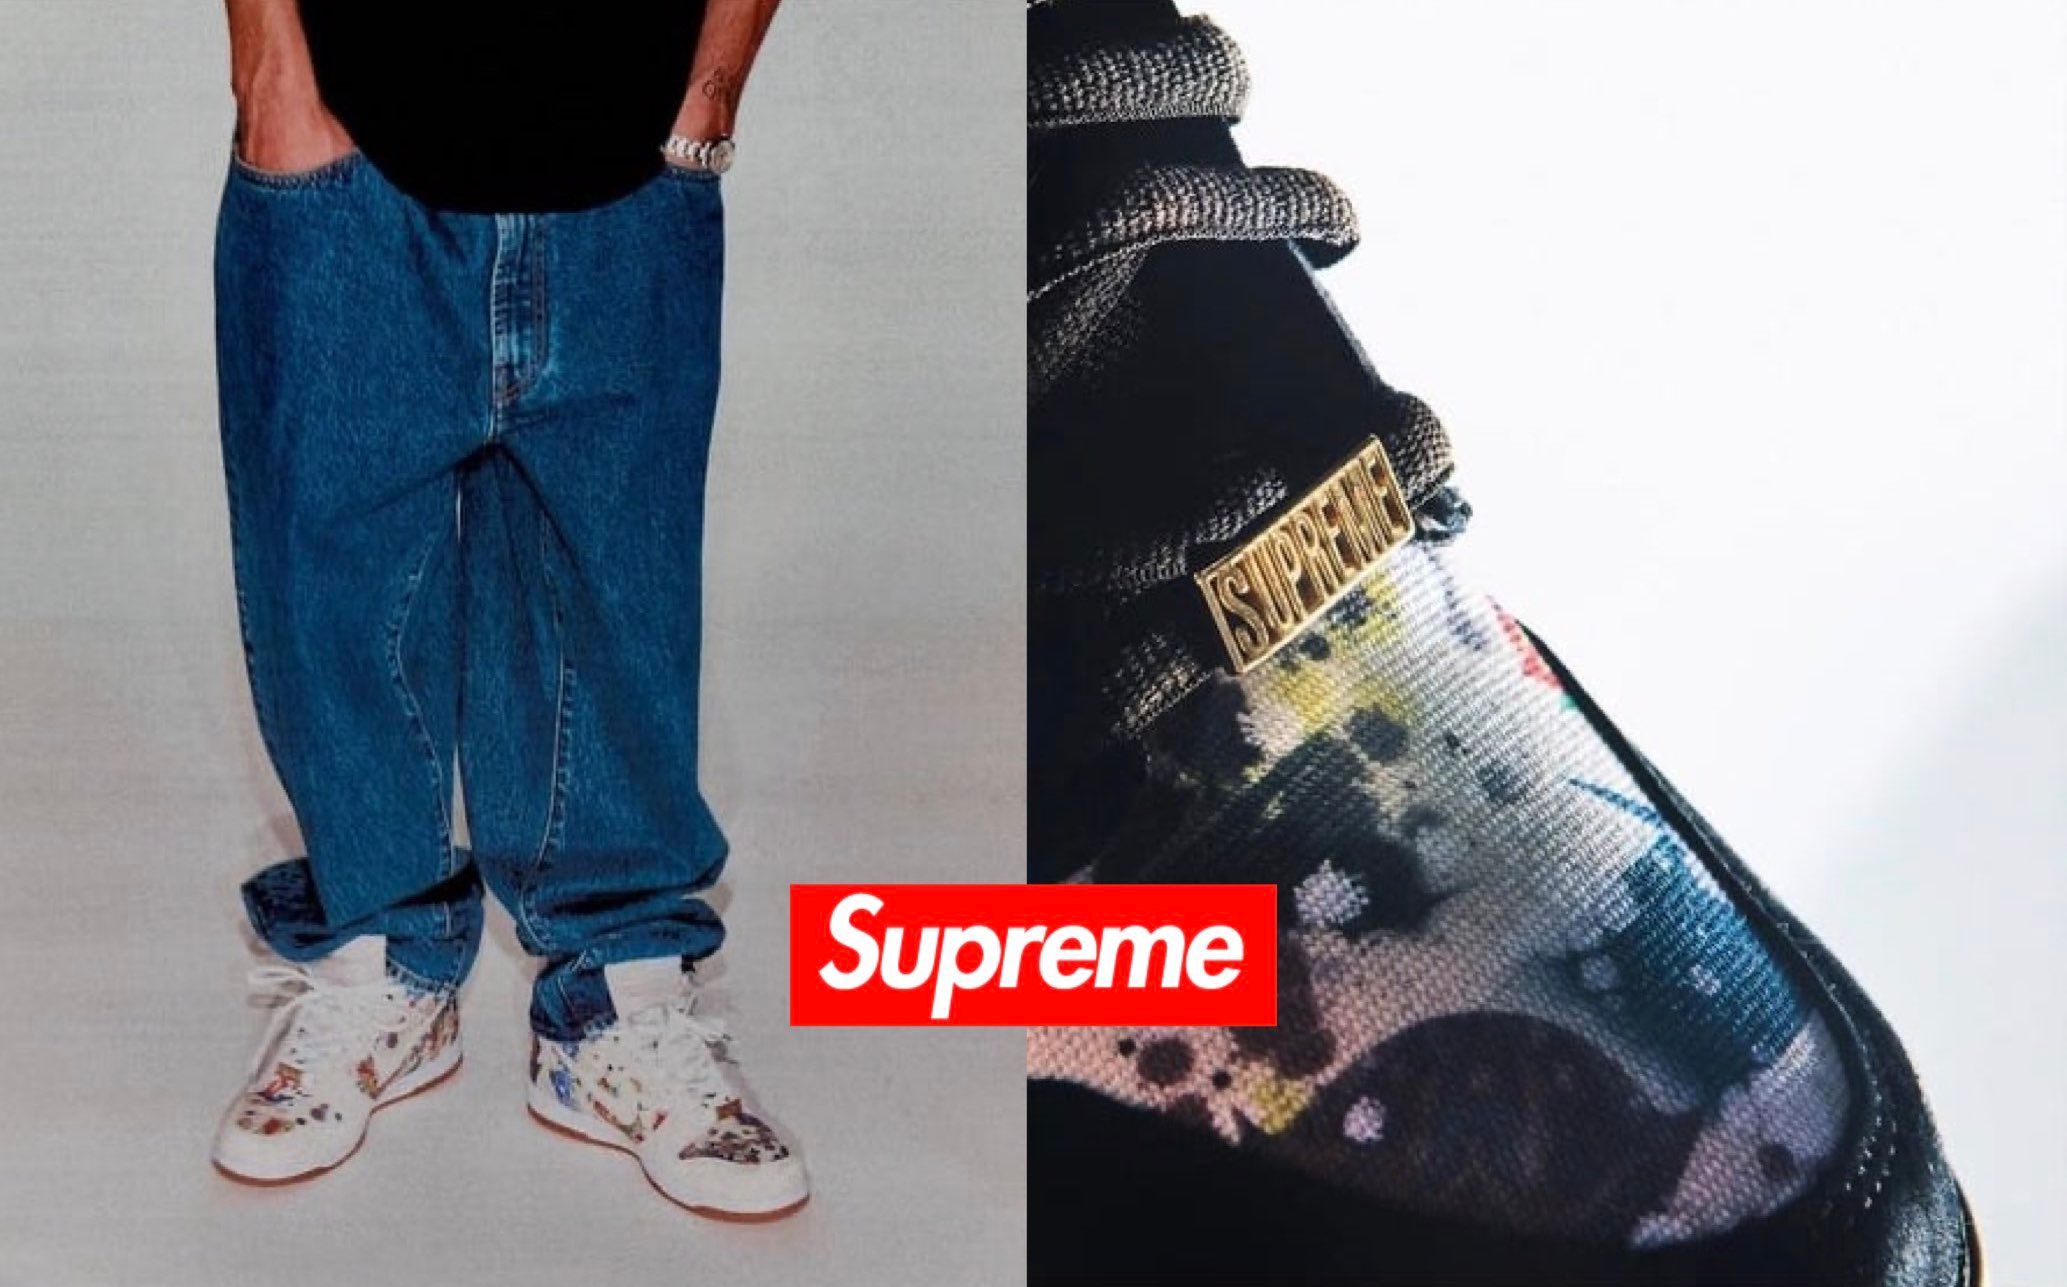 Supreme x louis Vuitton with champion pants and air yeezy 2